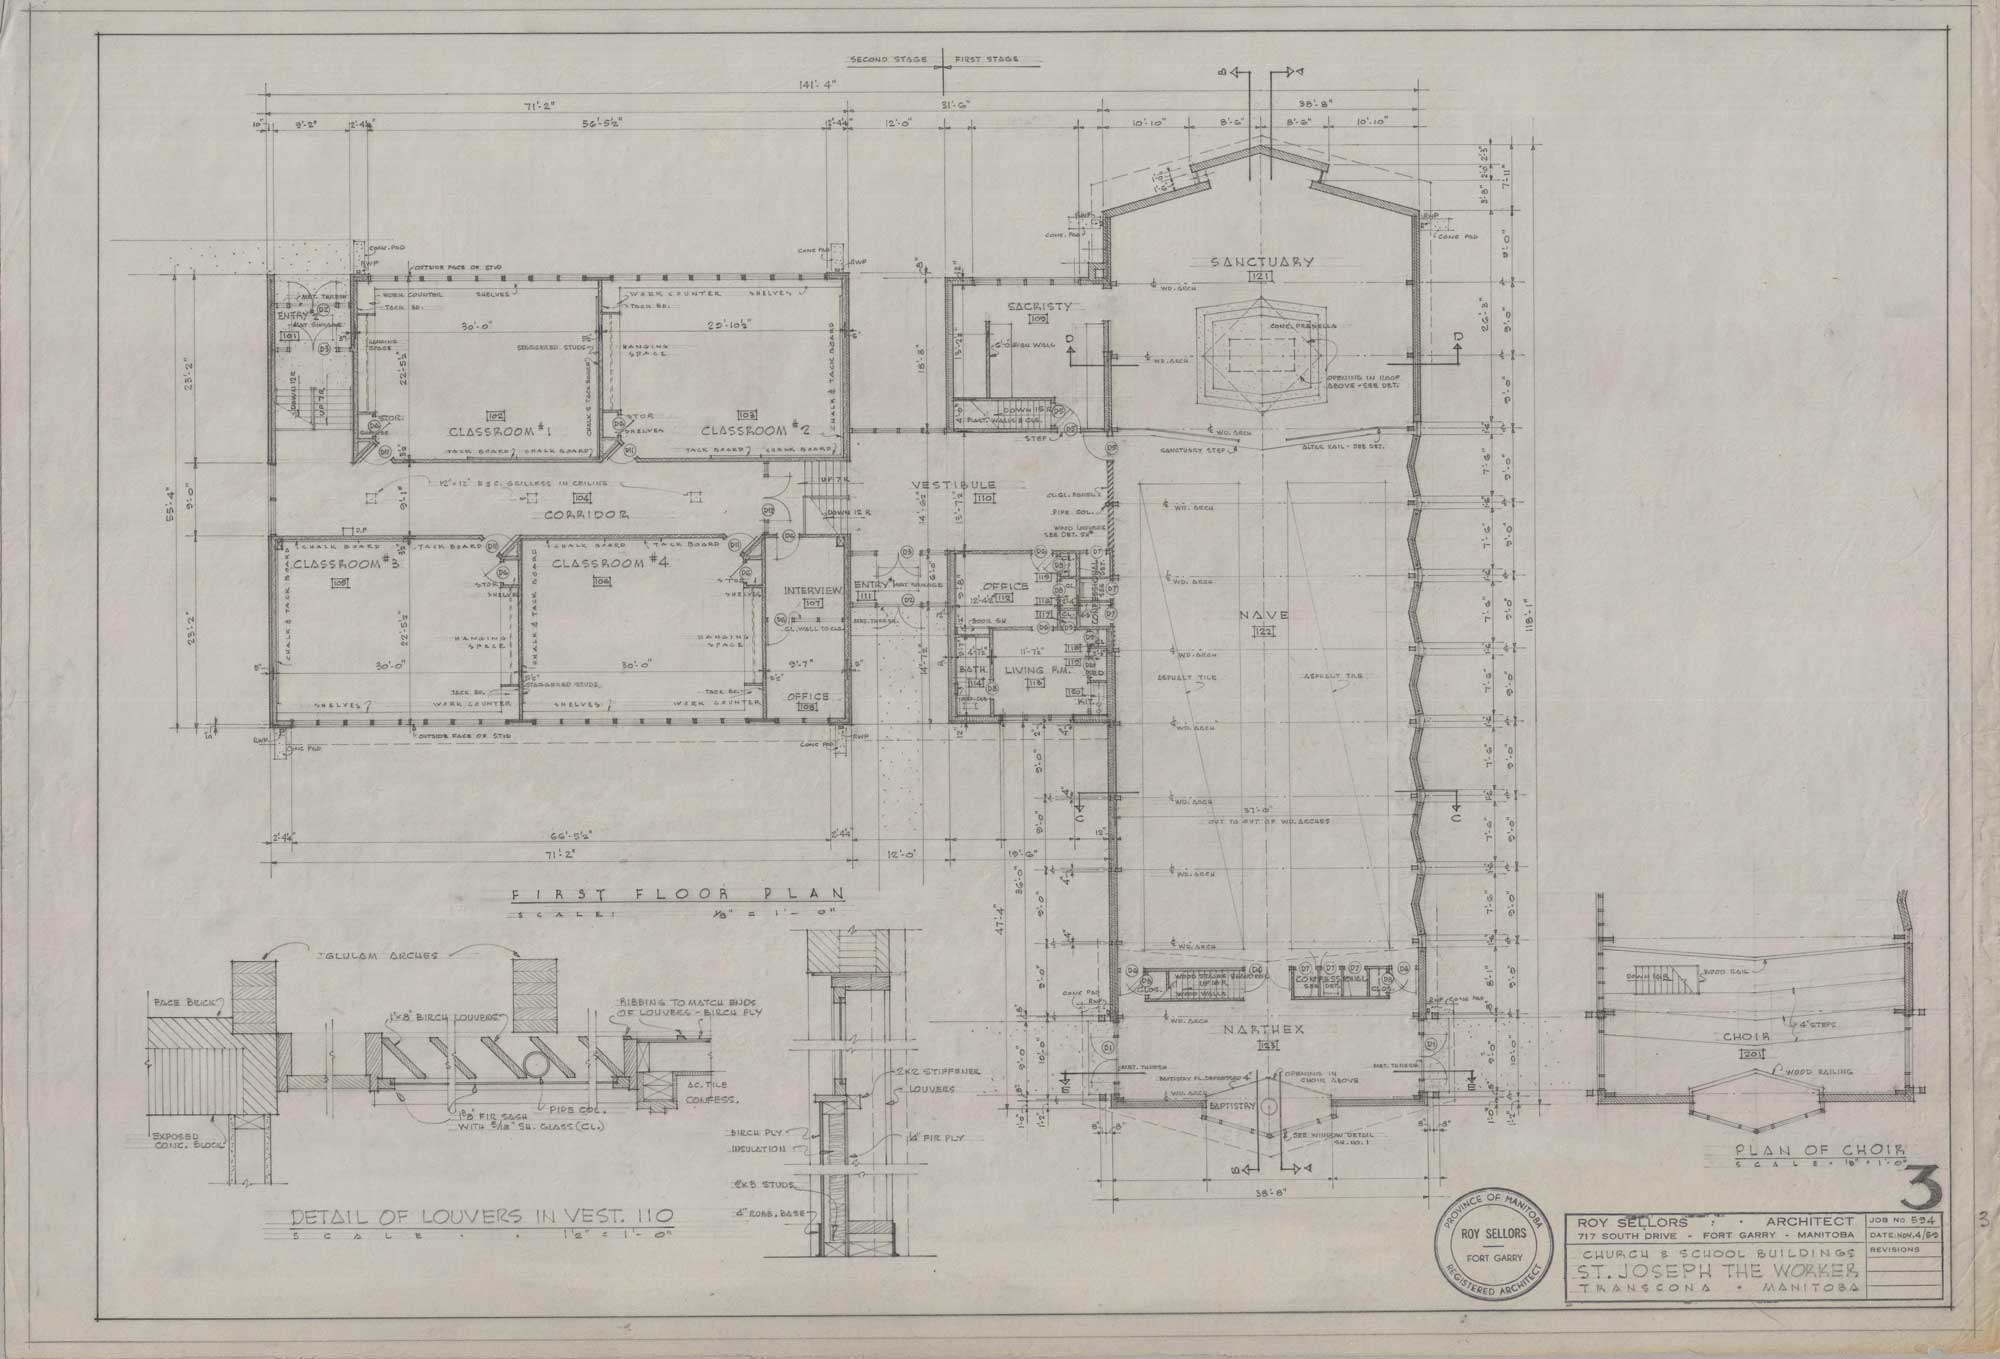 Image shows drawing of the main floor plan for St. Joseph the Worker.